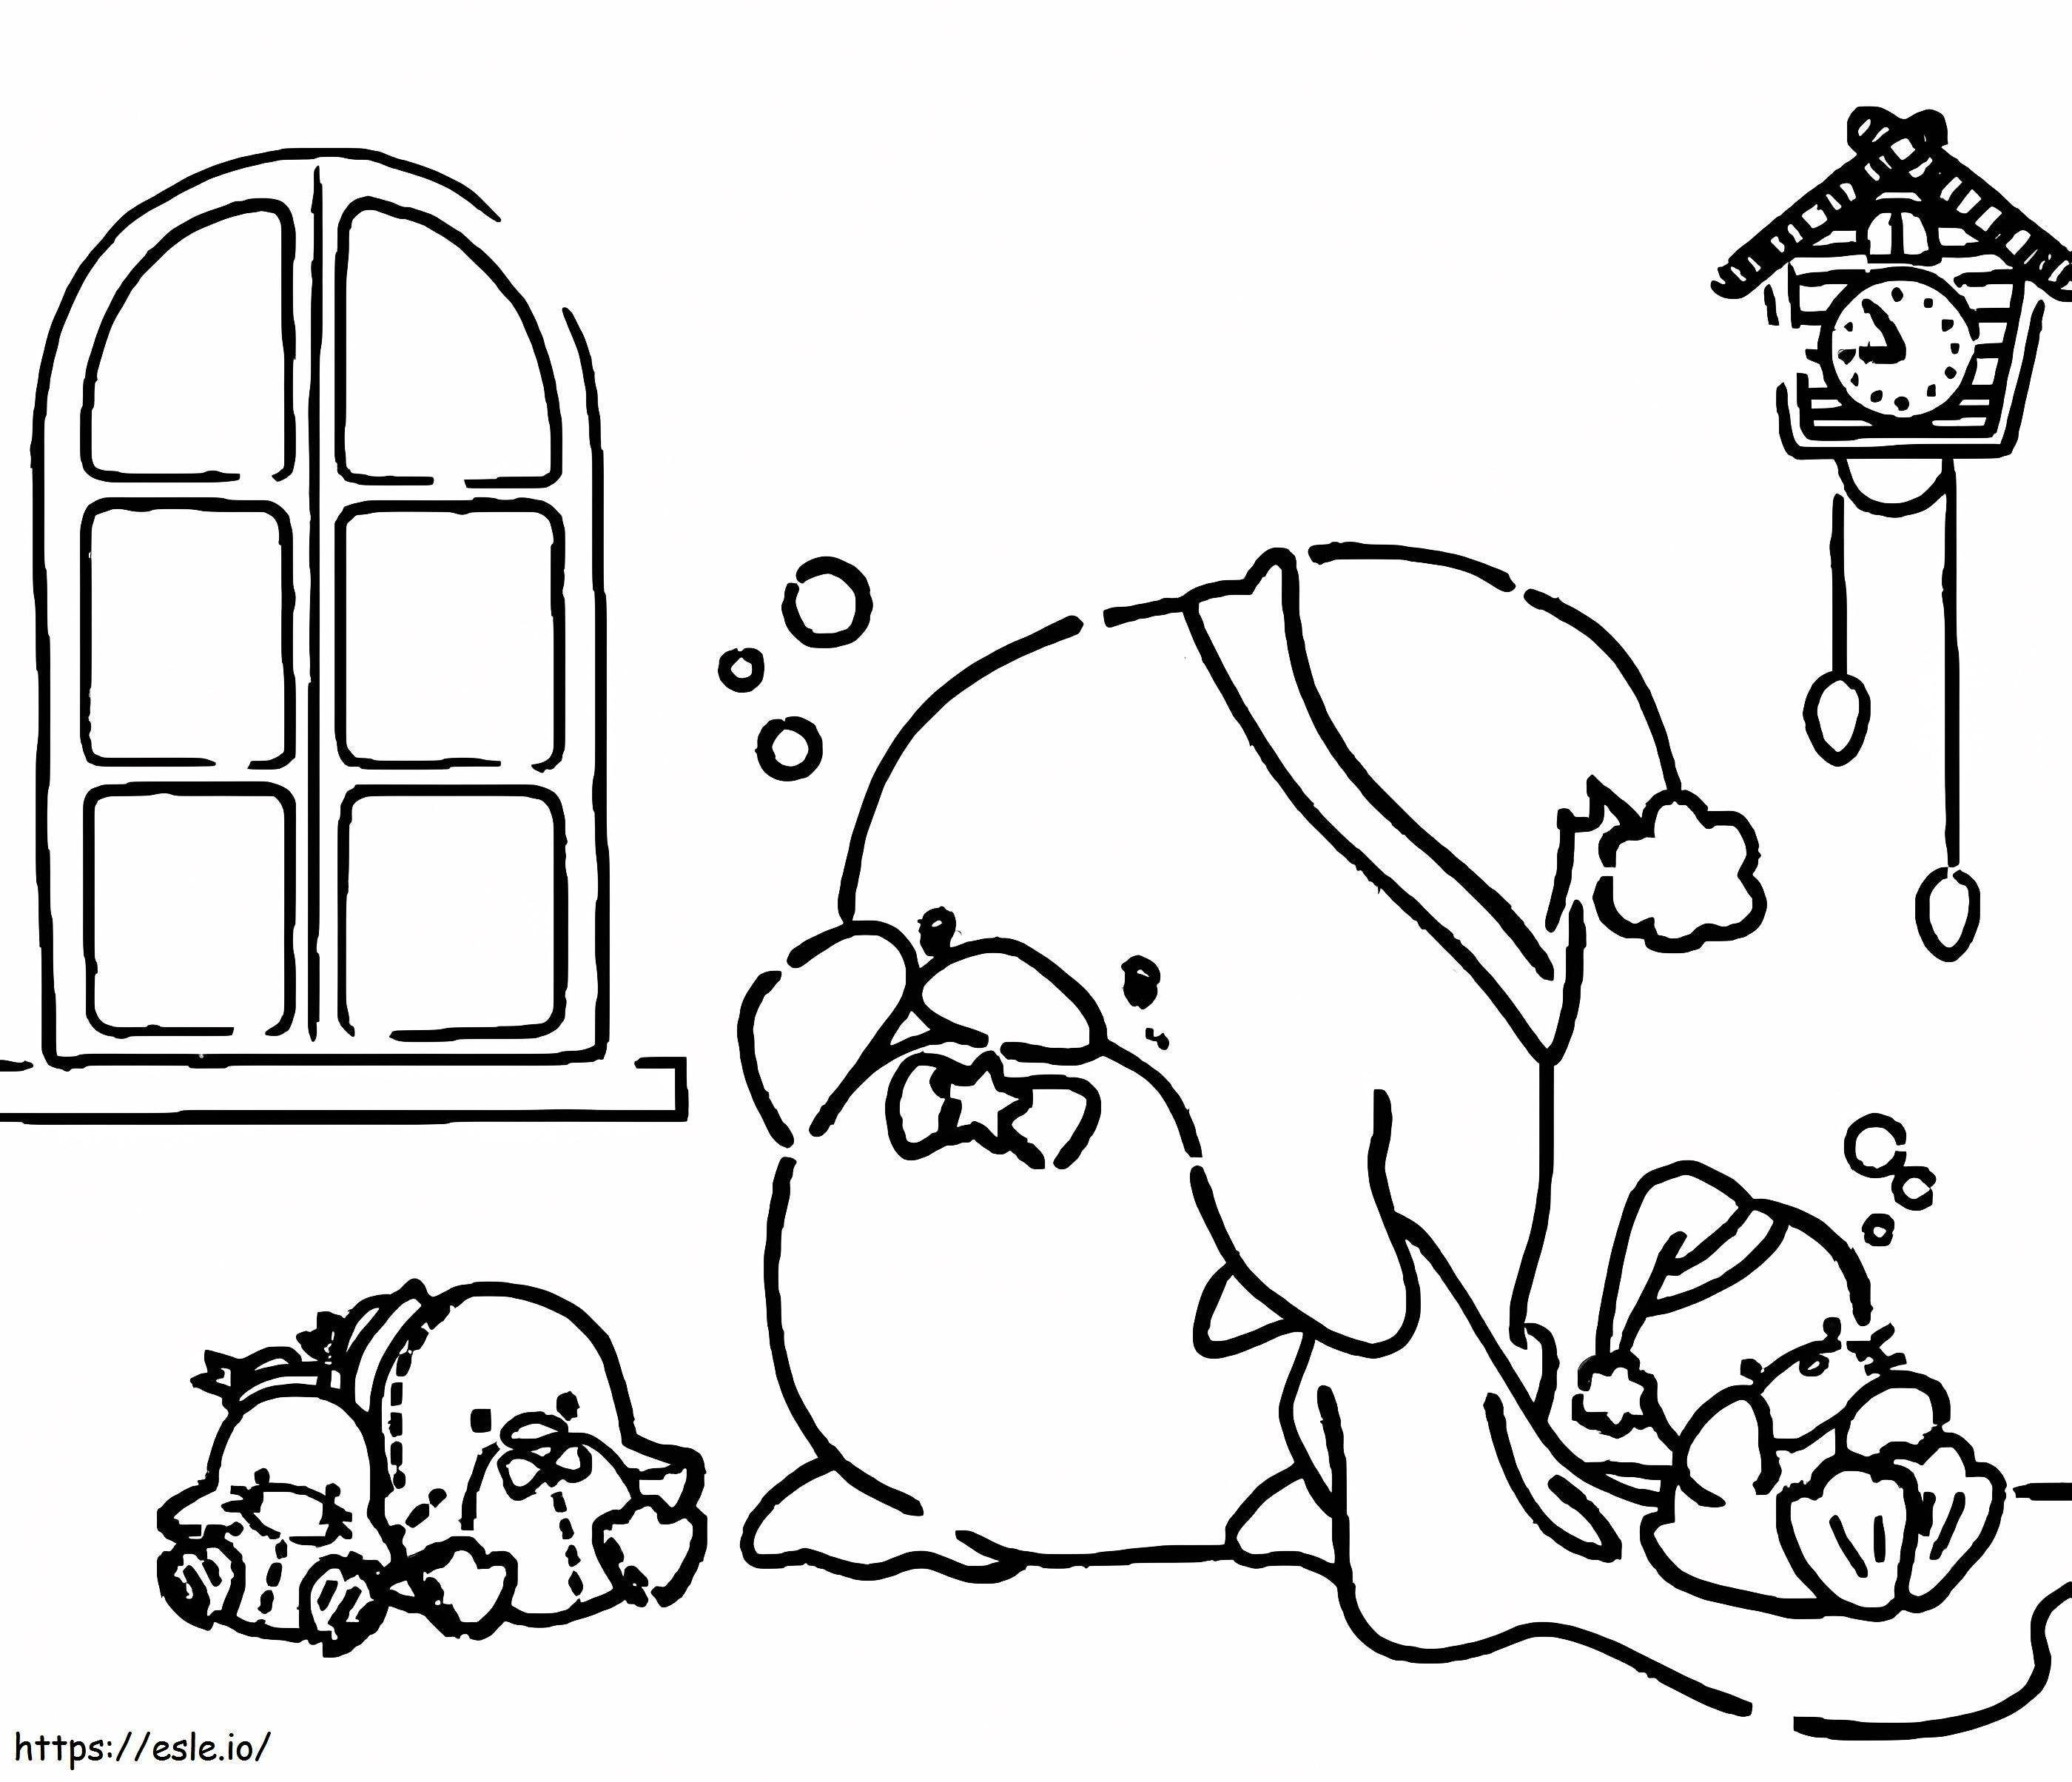 Tuxedo Sam On Christmas coloring page